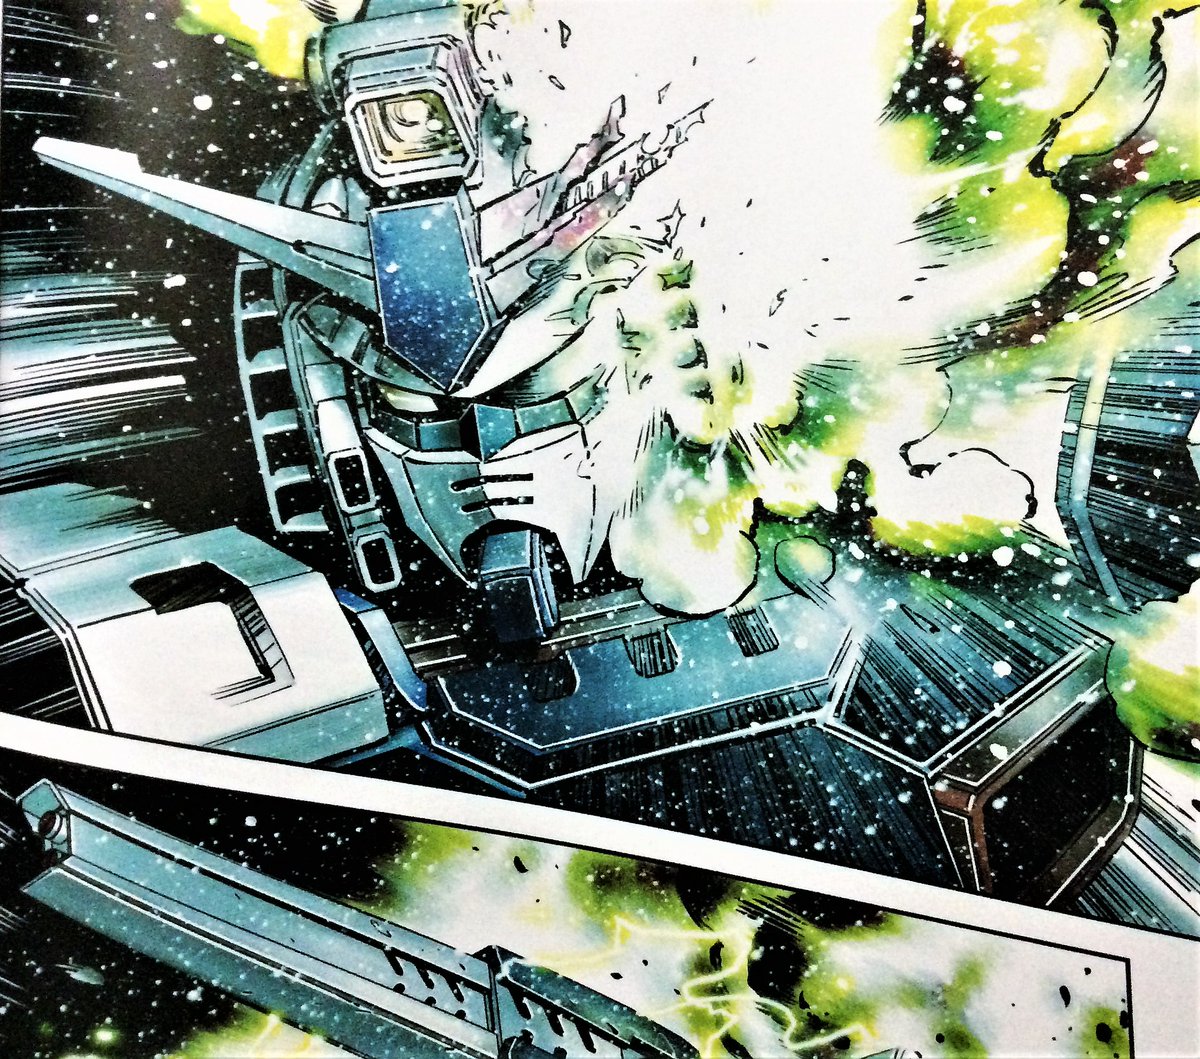 Yasuo Ohtagaki - Award-Winning artist, writer & mecha designer on the critically acclaimed Gundam Thunderbolt series. Ohtagaki is highly commended for his efforts to bring the Gundam franchise back to it's roots by combining U.C lore with new characters, and jazz inspired ideas.